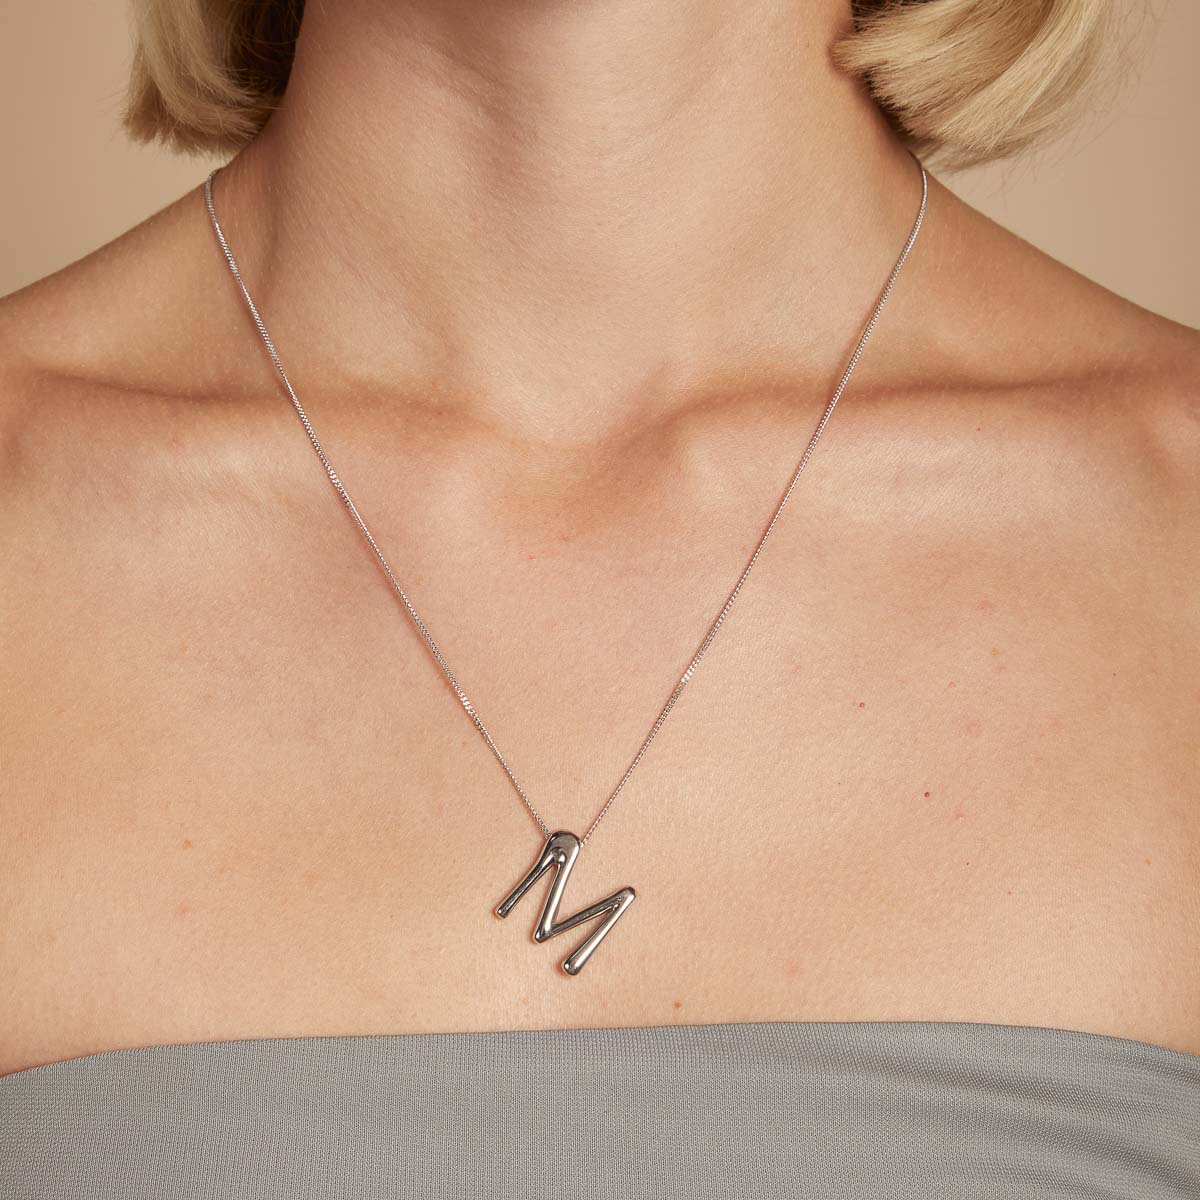 M Bold Initial Silver Necklace | Astrid & Miyu Necklaces